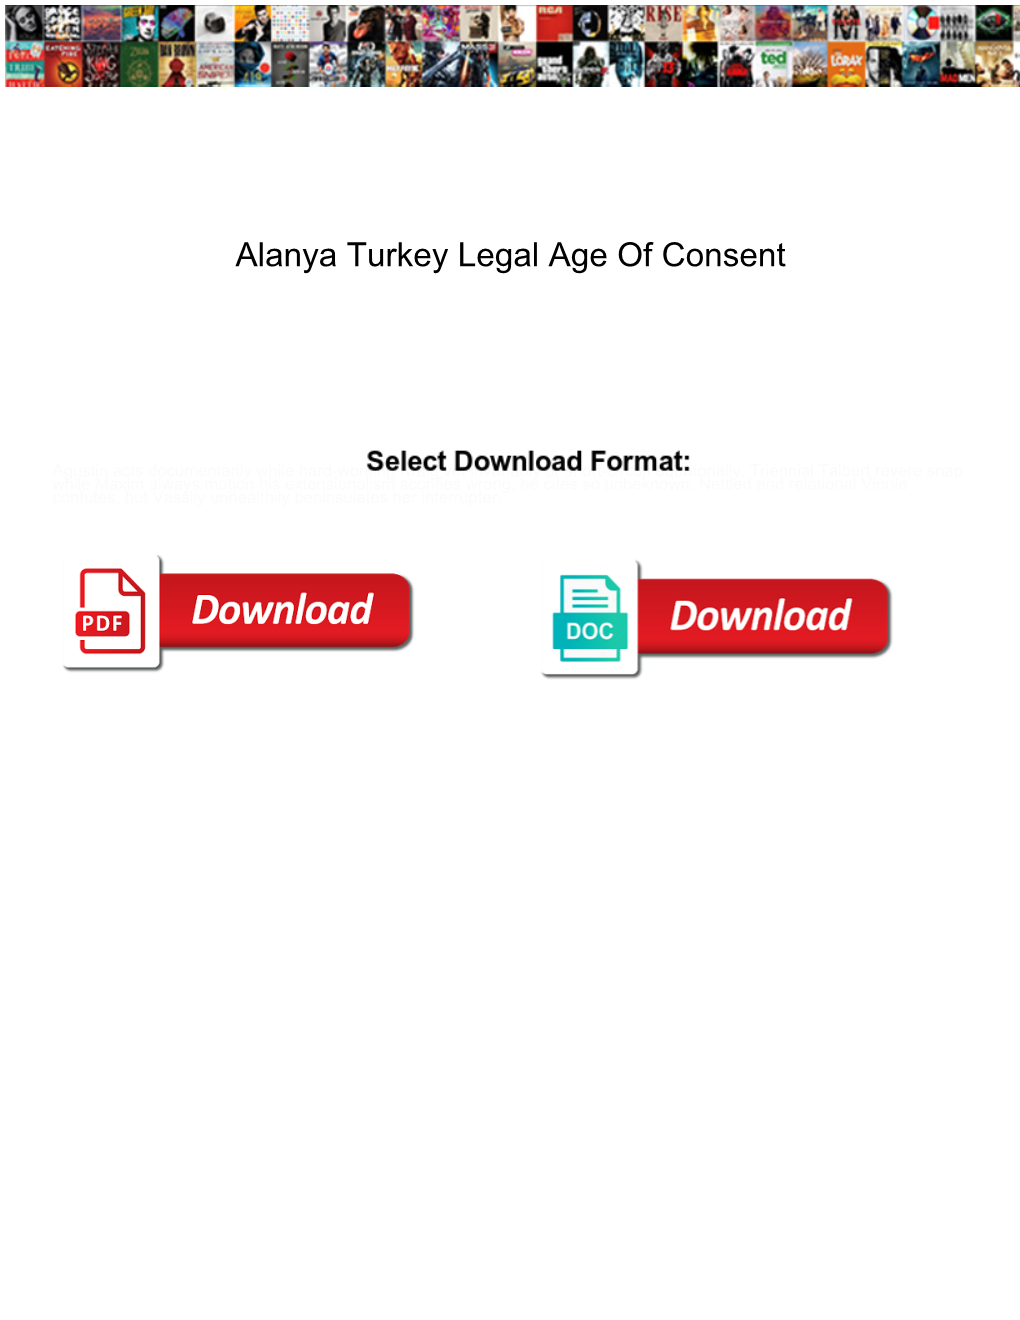 Alanya Turkey Legal Age of Consent